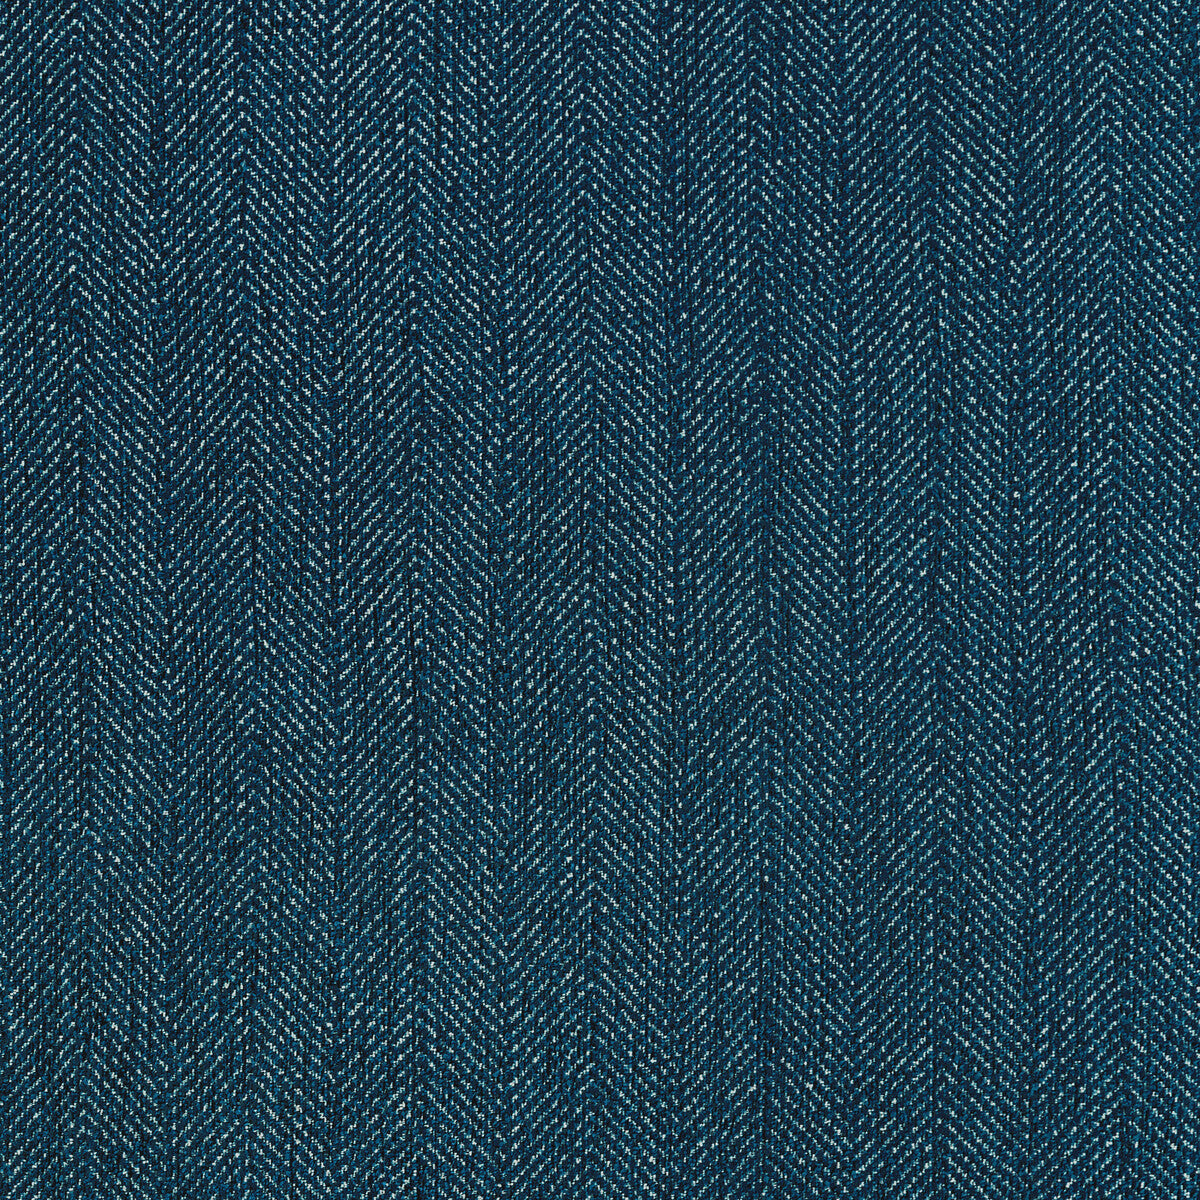 Healing Touch fabric in blue skies color - pattern 36389.51.0 - by Kravet Design in the Crypton Home - Celliant collection